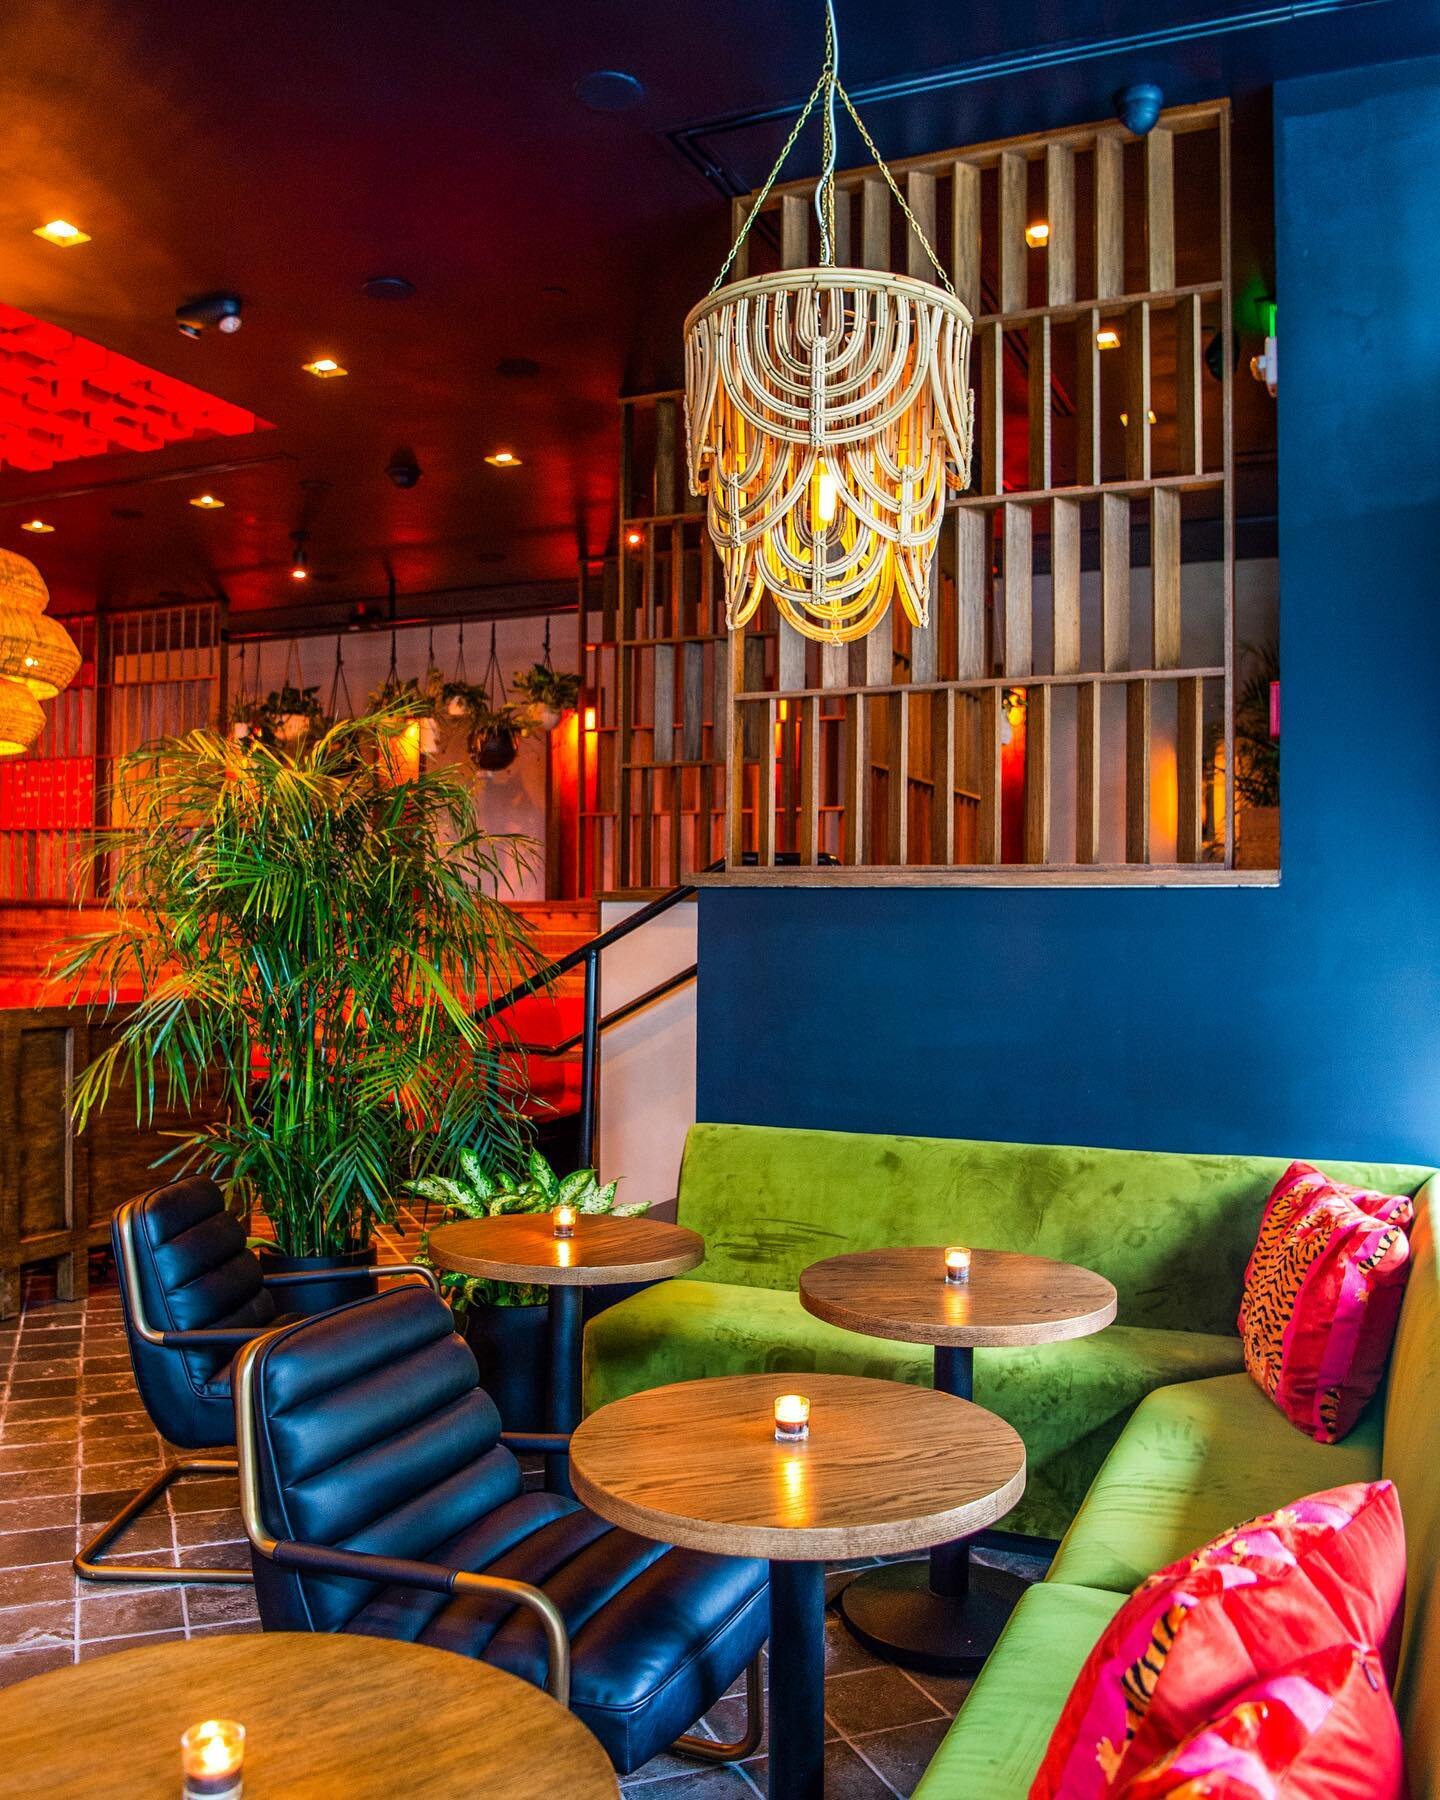 Celebrate the weekend 🤩 join us for bites &amp; a cocktail in our lounge 🏮🧧🍸🥢